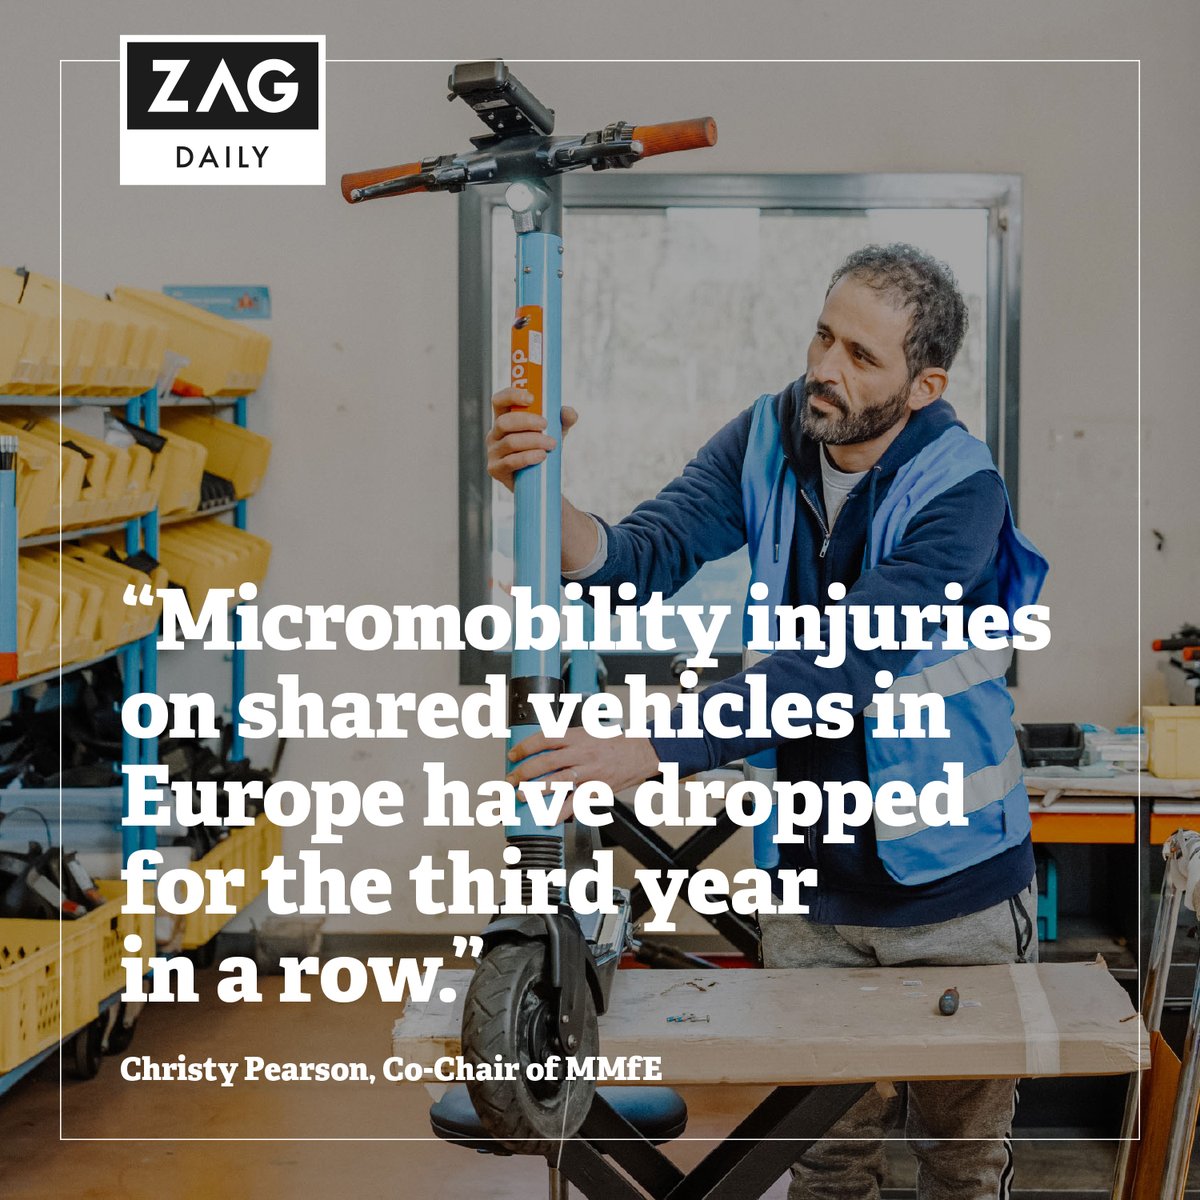 In today’s newsletter see our first annual edition of The Zag List spotlighting 50 new mobility changemakers, plus @AmazonUK launches its first micromobility hub in Northern Ireland & injuries on shared vehicles drop once again. Sign up here: zagdaily.com/zag-weekly/